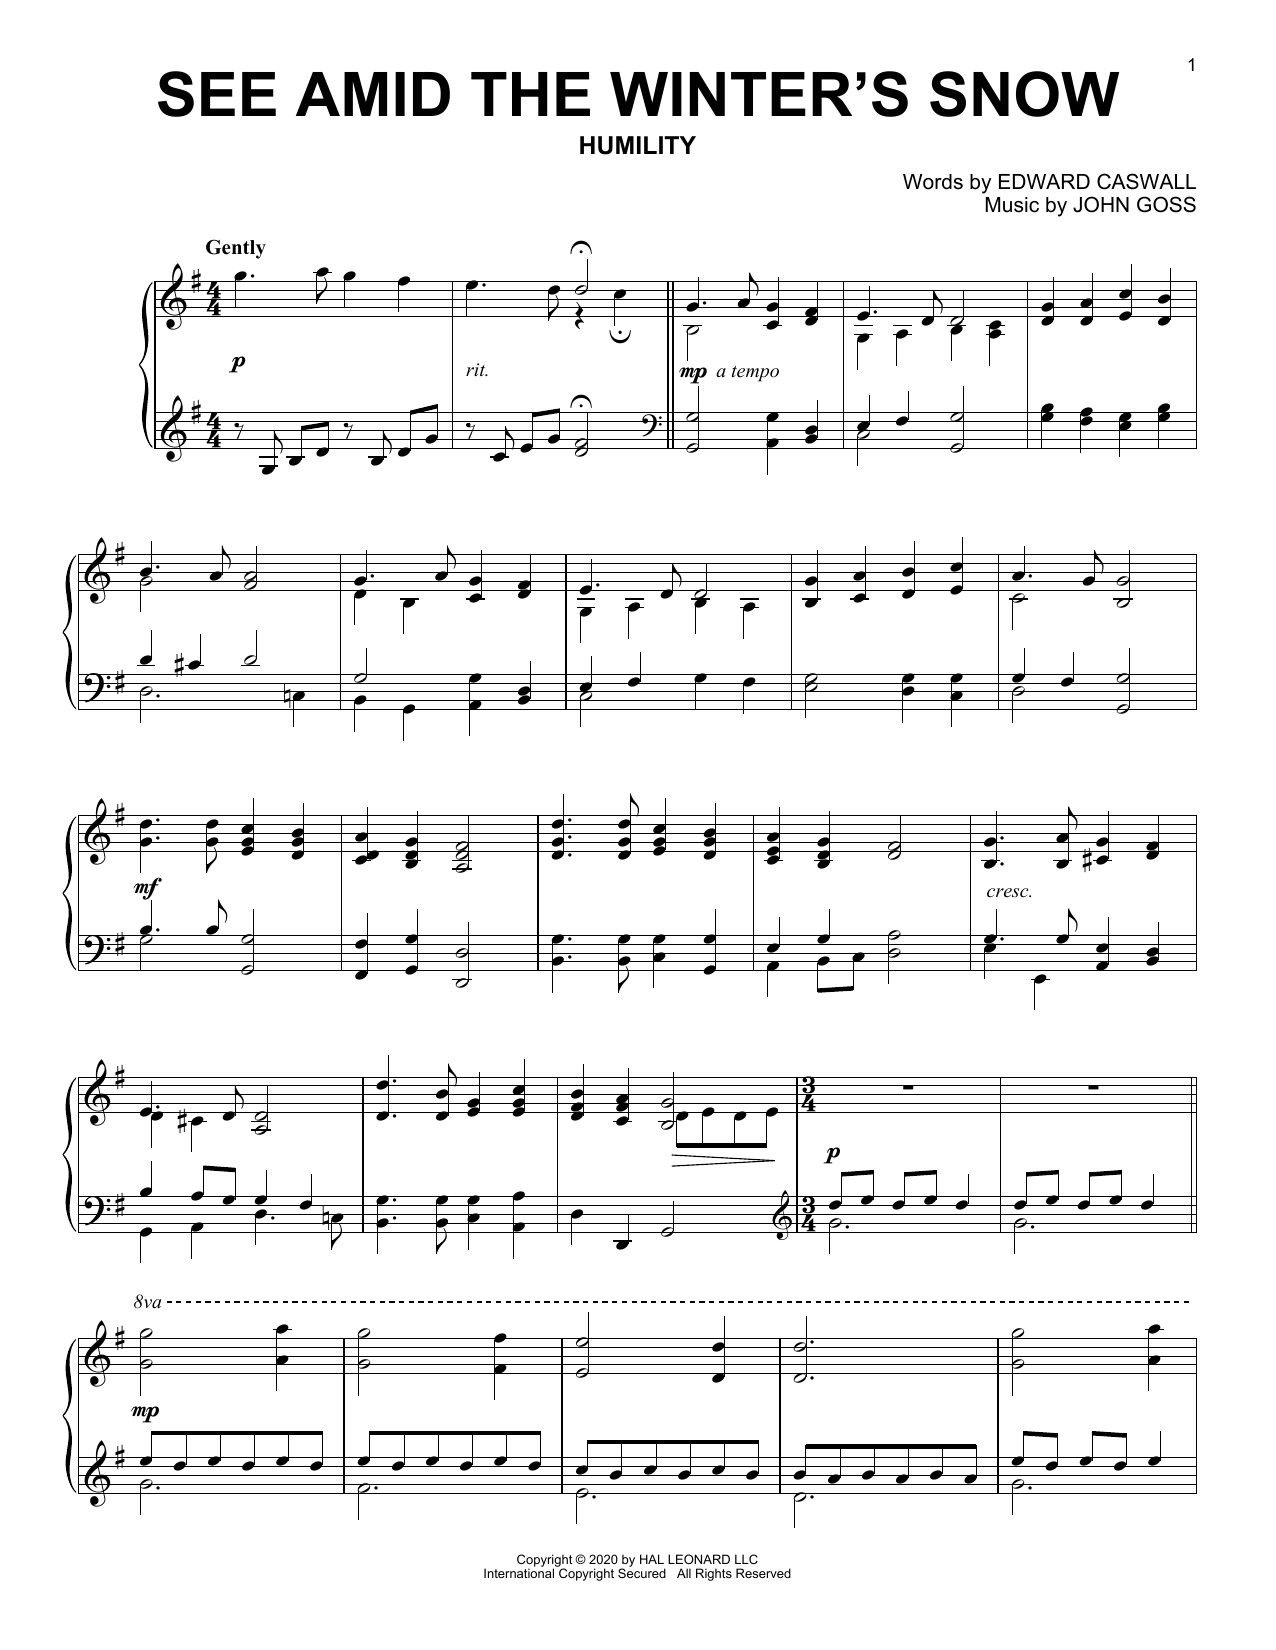 Download Edward Caswall and John Goss See Amid The Winter's Snow Sheet Music